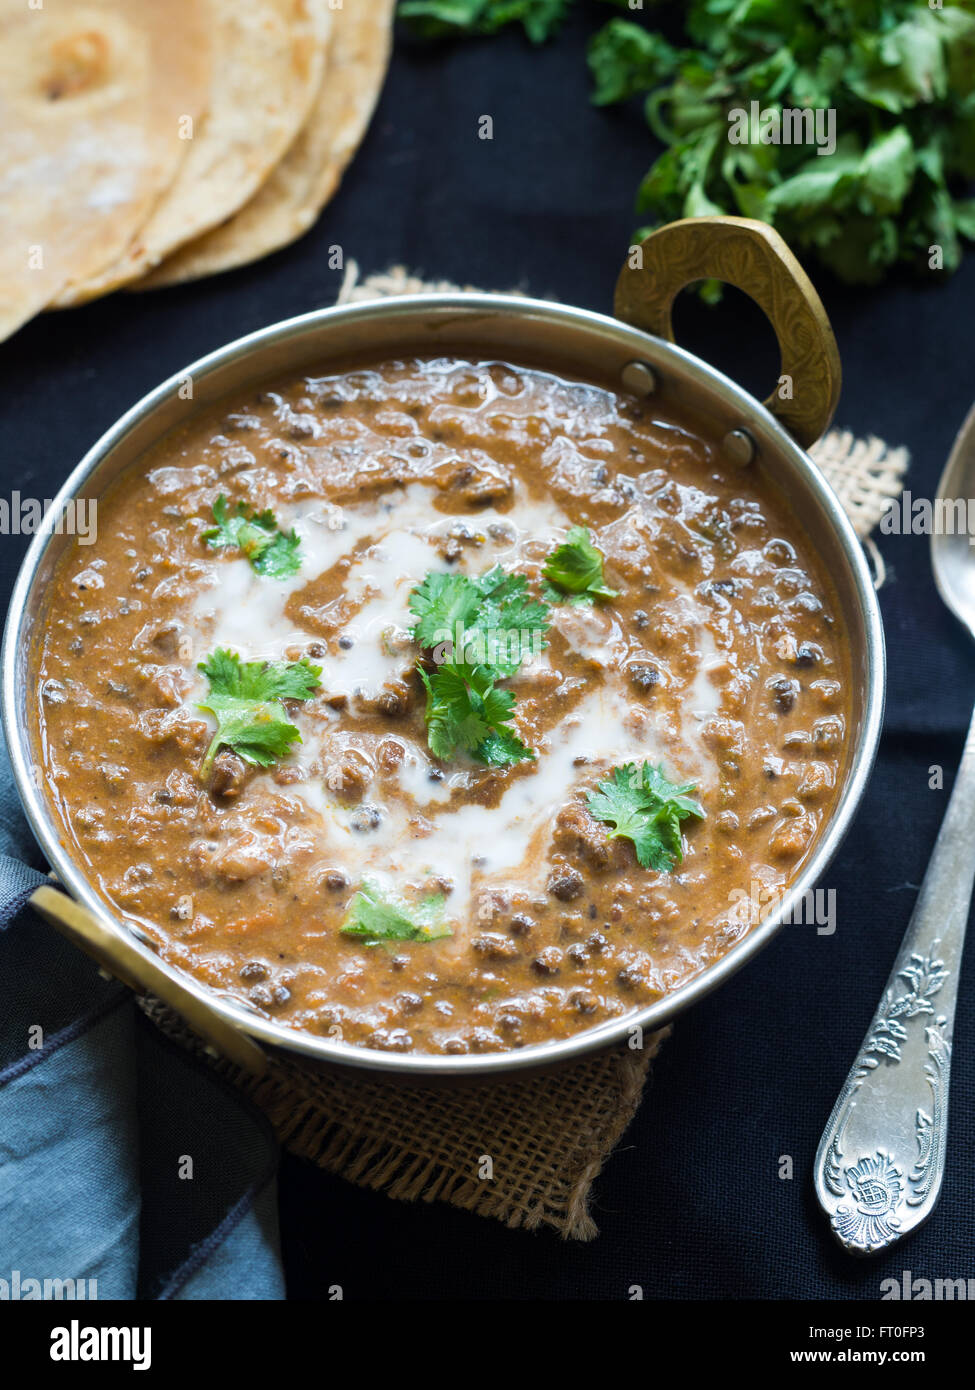 Dal makhani ('Buttery Lentil'), a popular dish originating from the Punjab region of India and Pakistan. Stock Photo